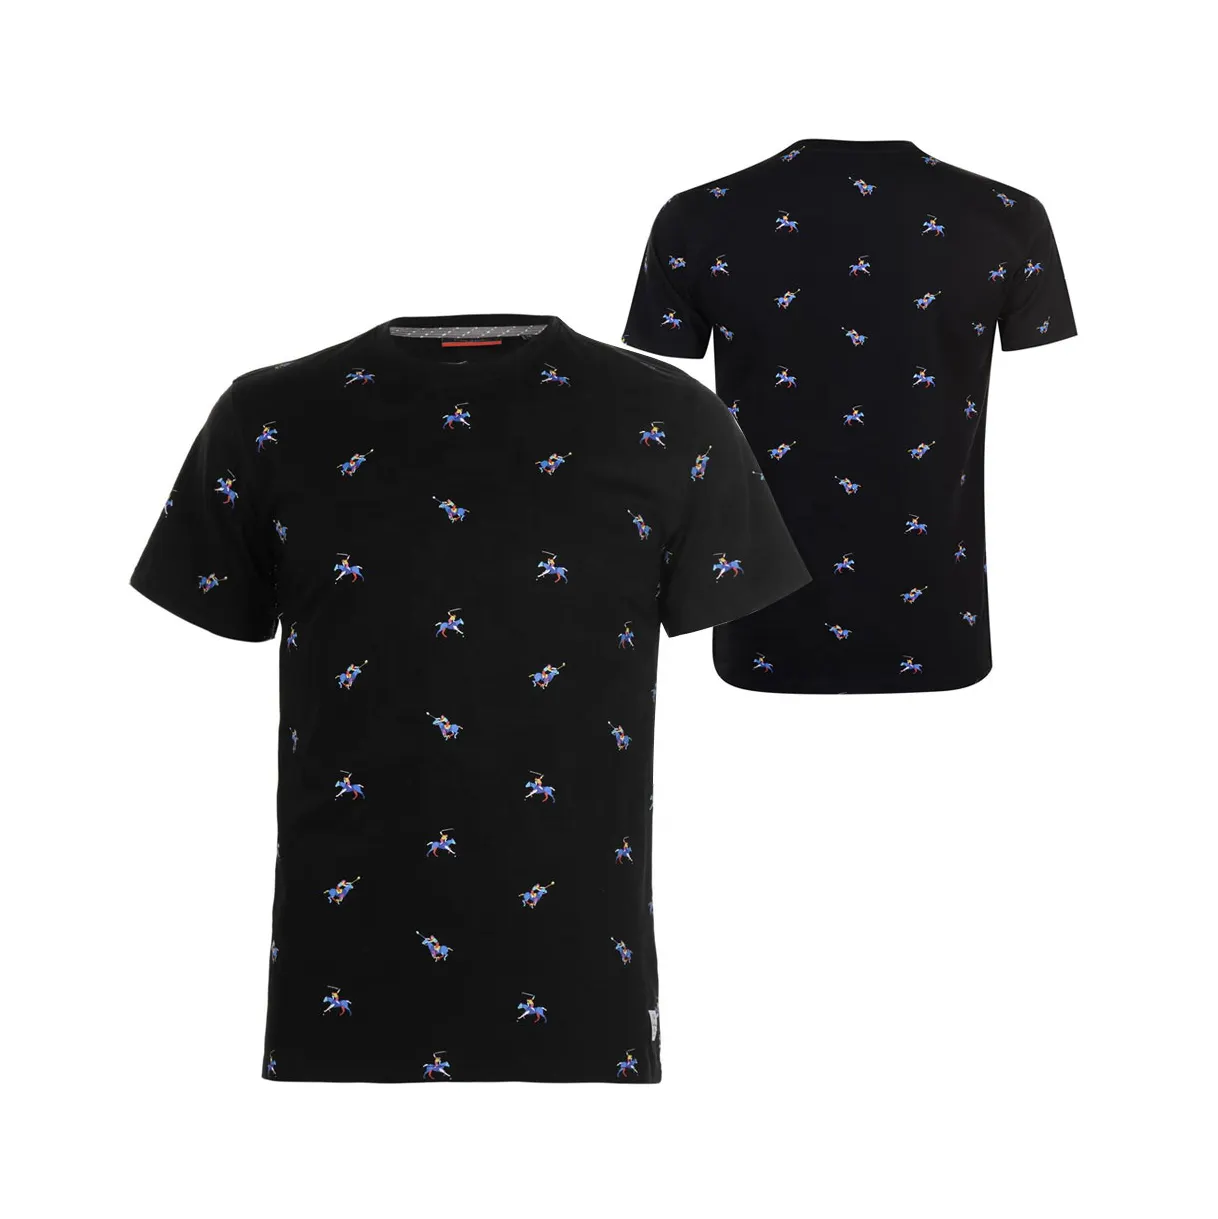 New Short Sleeve Loose Round Neck Hong Kong Style Tee Shirt Youth Casual Clothes Men's T-Shirt